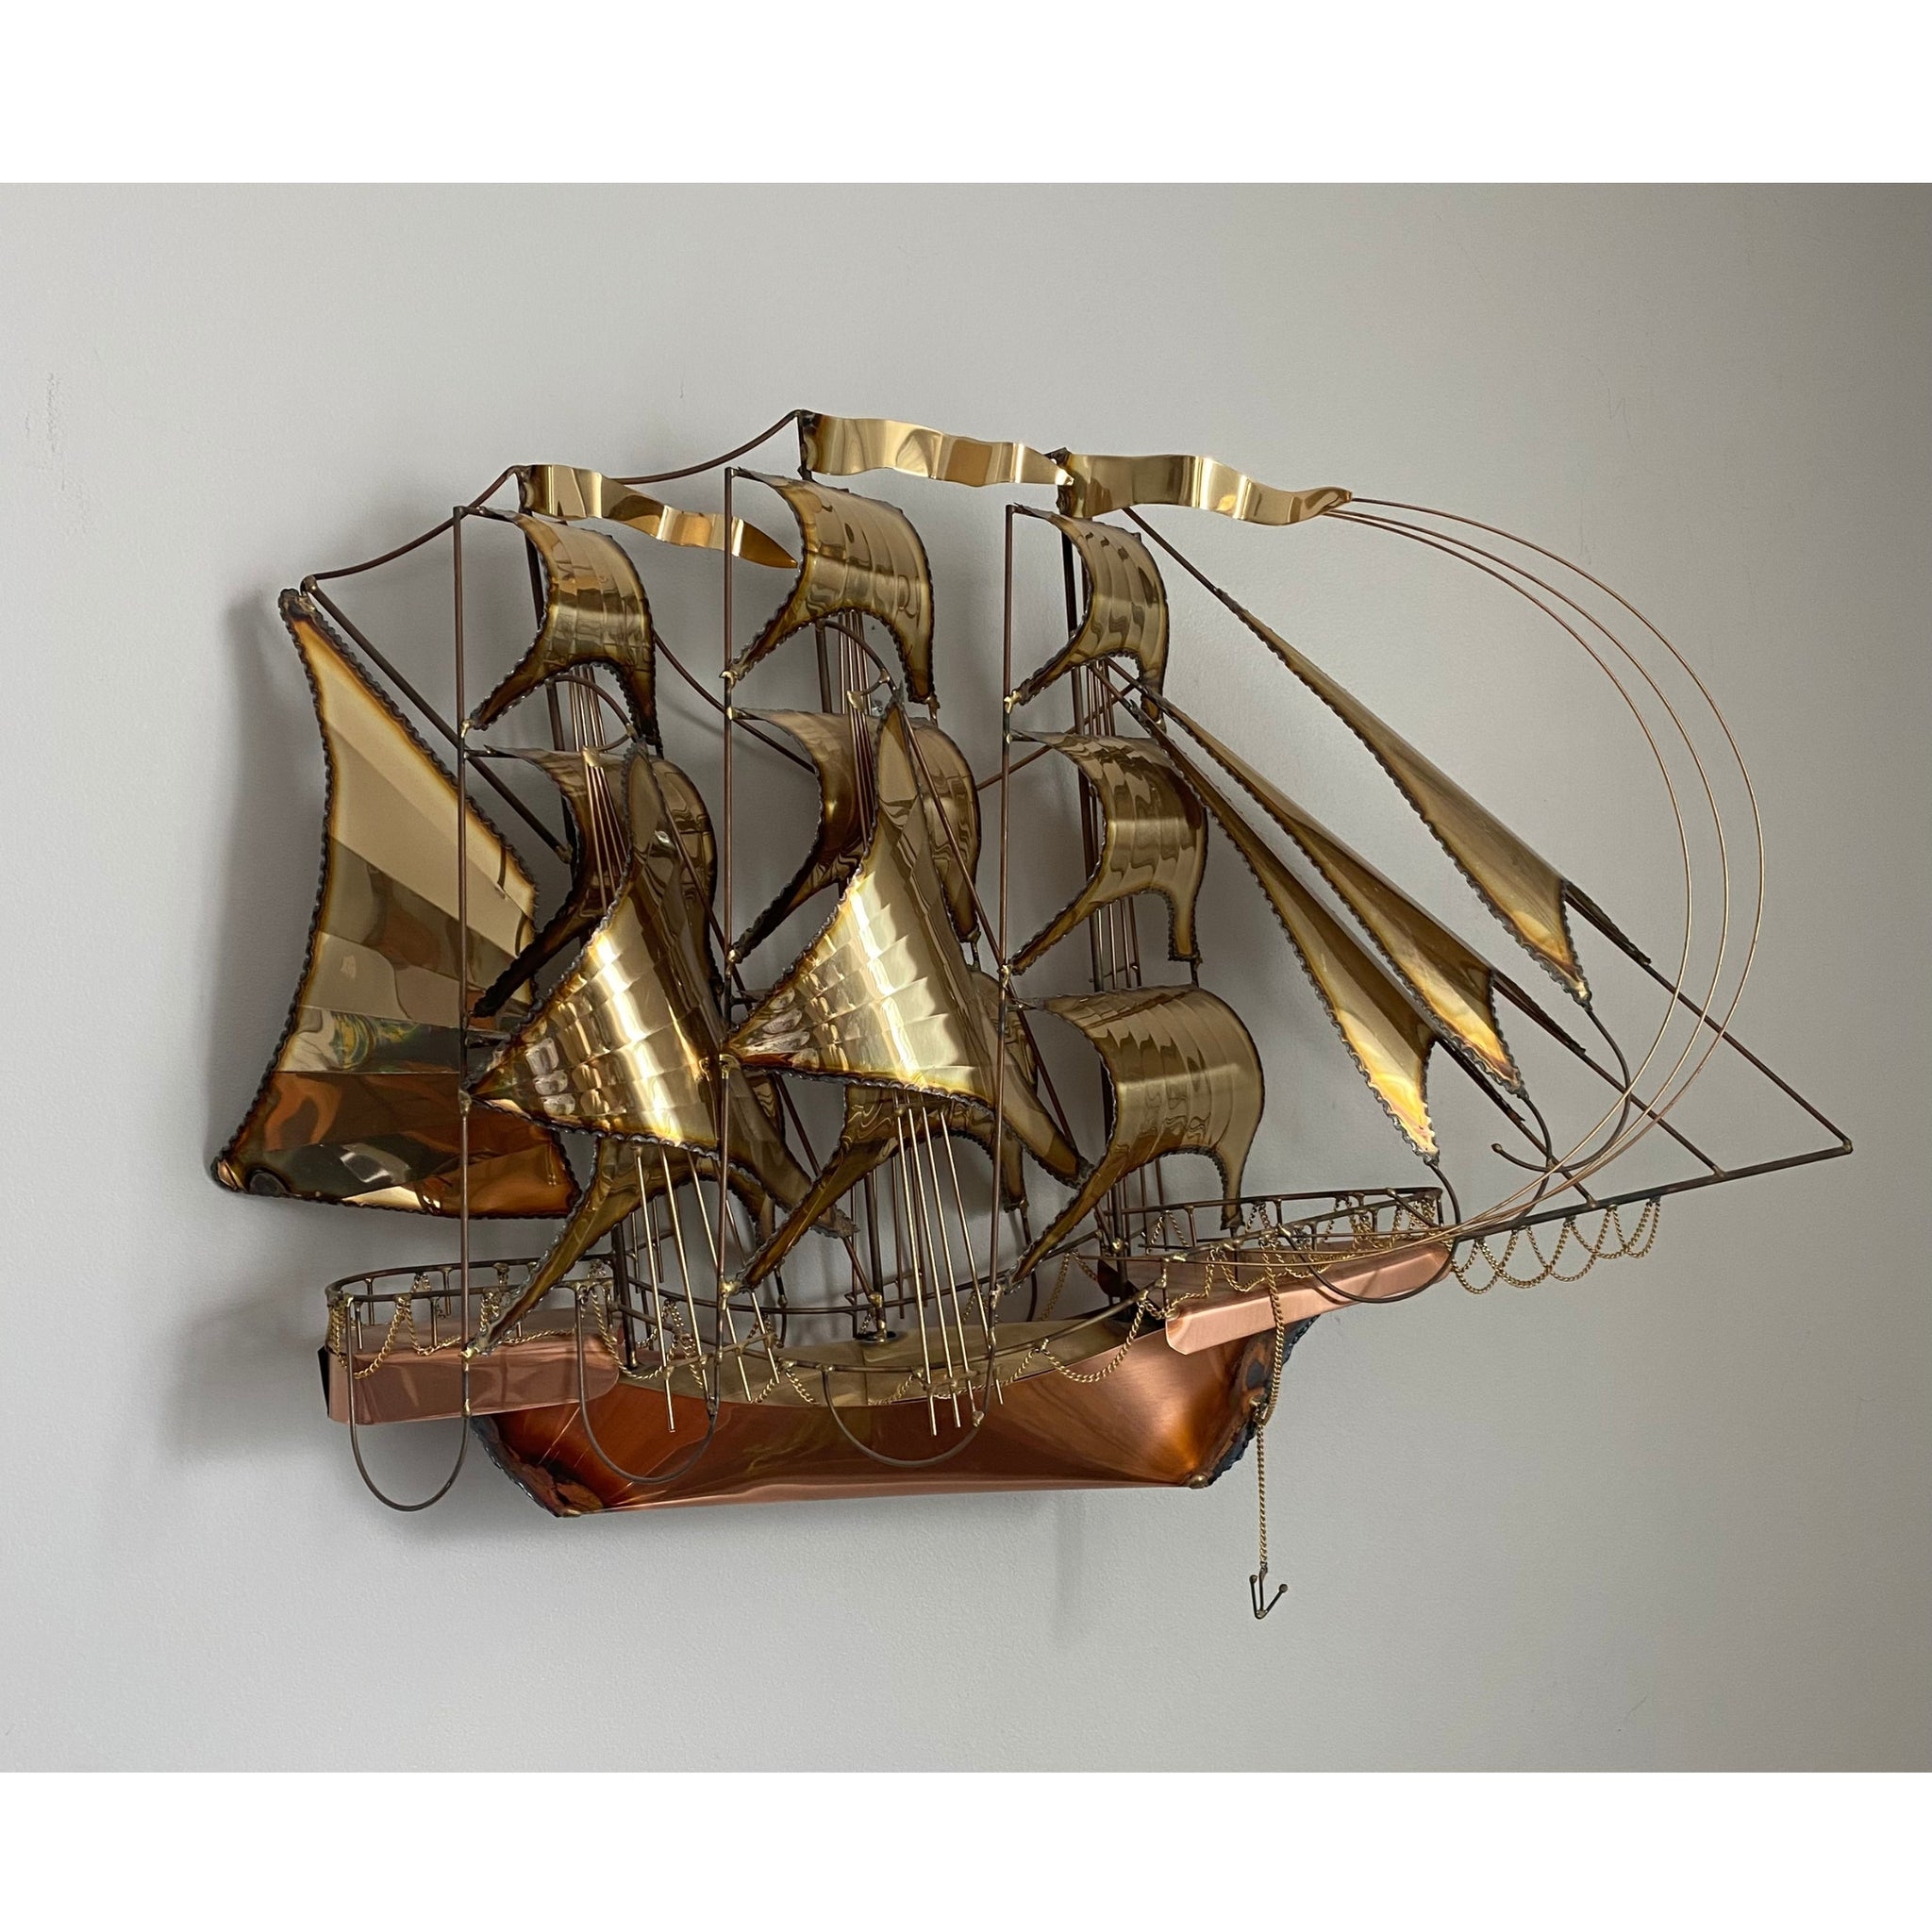 Collectable Brass Ship - 431 For Sale on 1stDibs